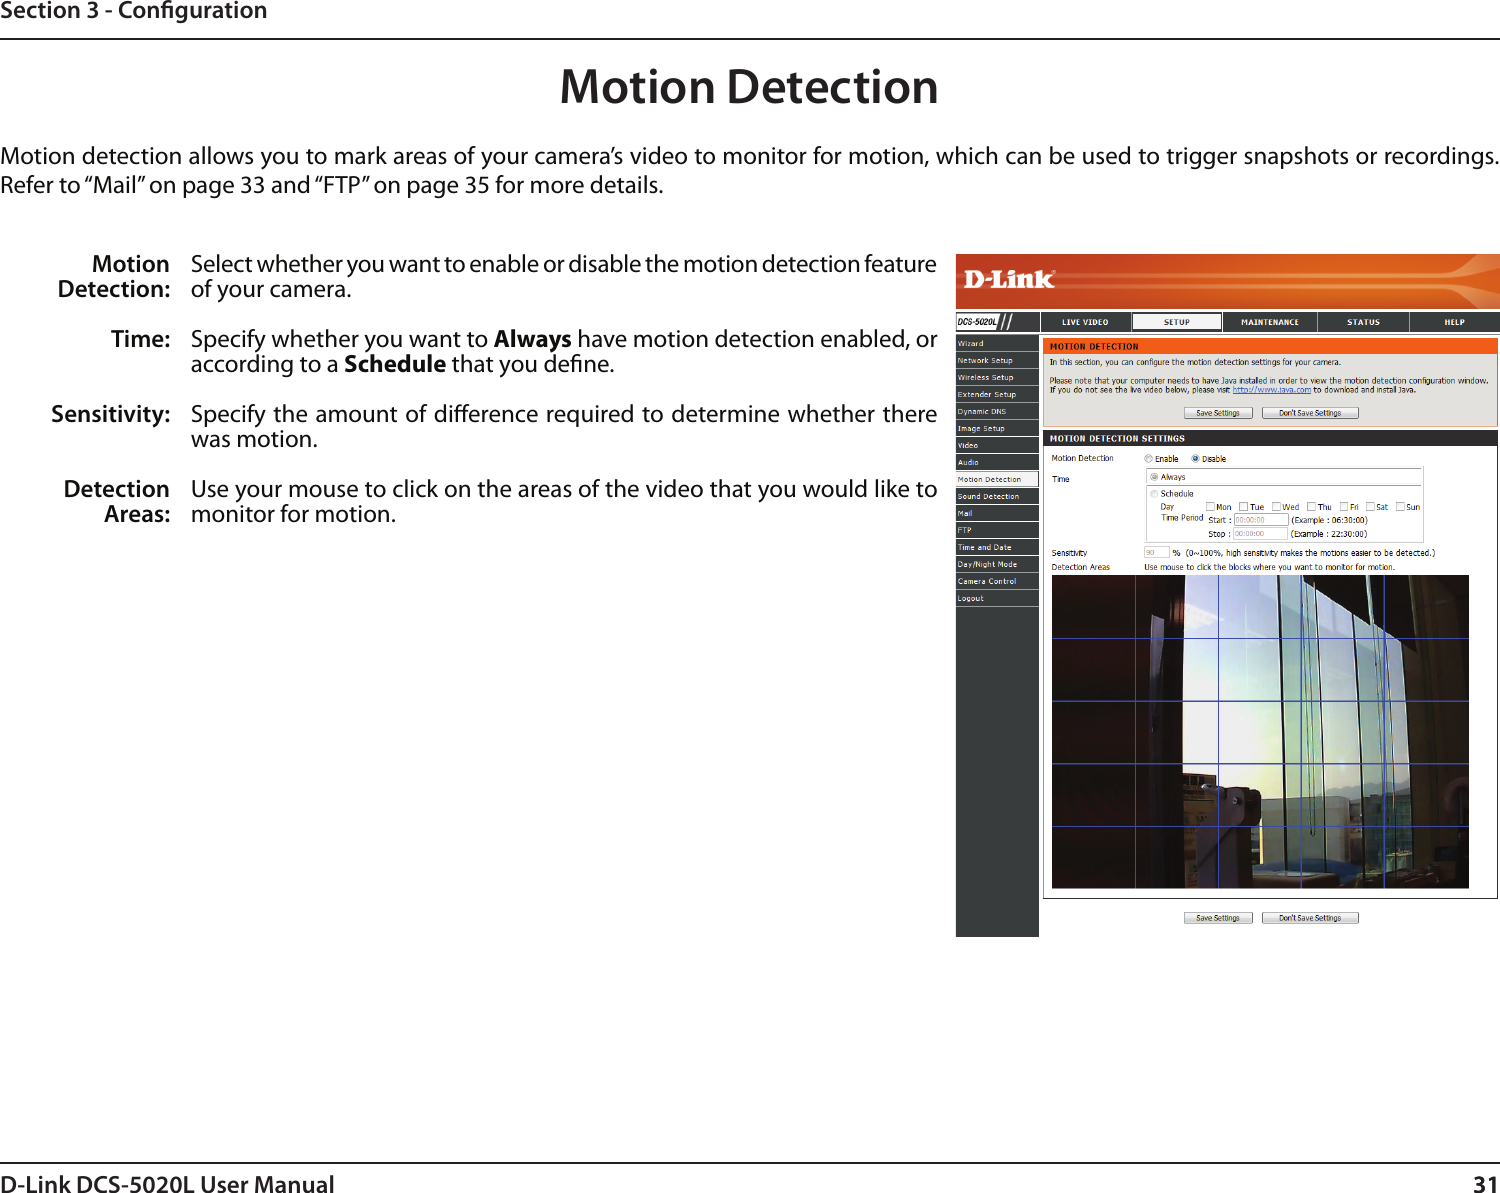 31D-Link DCS-5020L User Manual 31Section 3 - CongurationMotion DetectionMotion detection allows you to mark areas of your camera’s video to monitor for motion, which can be used to trigger snapshots or recordings. Refer to “Mail” on page 33 and “FTP” on page 35 for more details.Motion Detection:Time:Sensitivity:Detection Areas:Select whether you want to enable or disable the motion detection feature of your camera.Specify whether you want to Always have motion detection enabled, or according to a Schedule that you dene.Specify the amount of dierence required to determine whether there was motion.Use your mouse to click on the areas of the video that you would like to monitor for motion. 